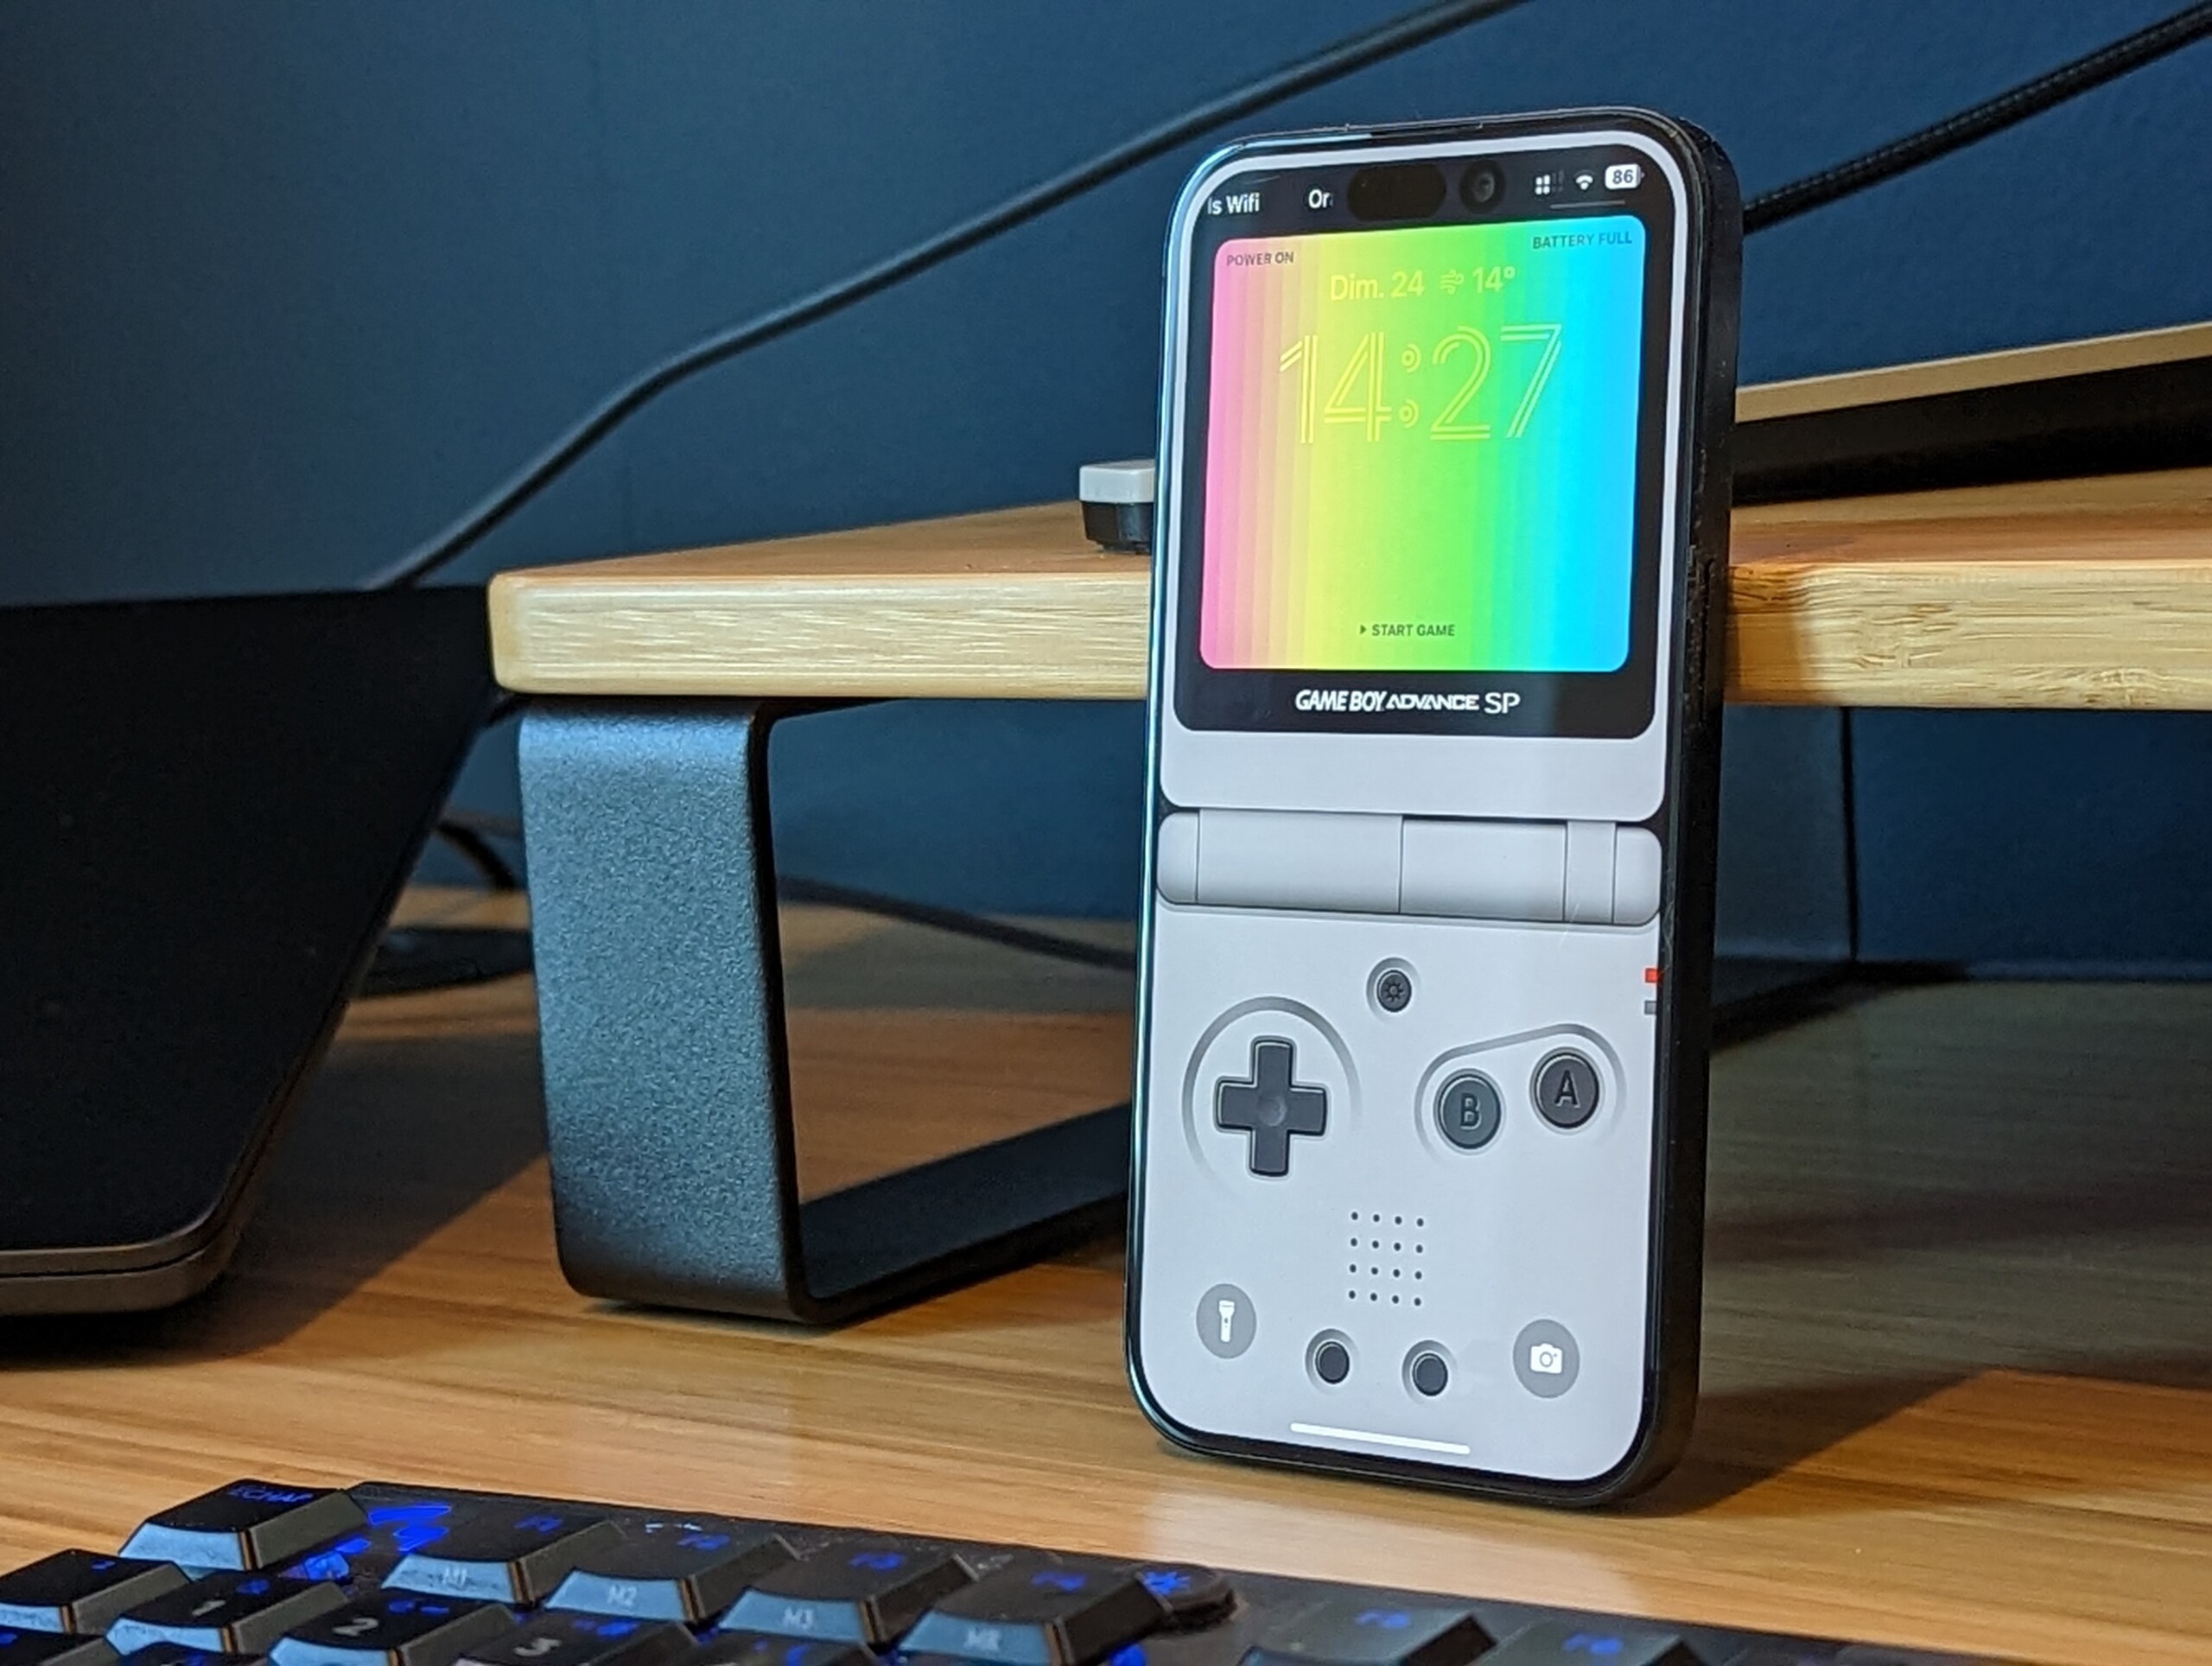 Turn your smartphone into a Game Boy with these wallpapers